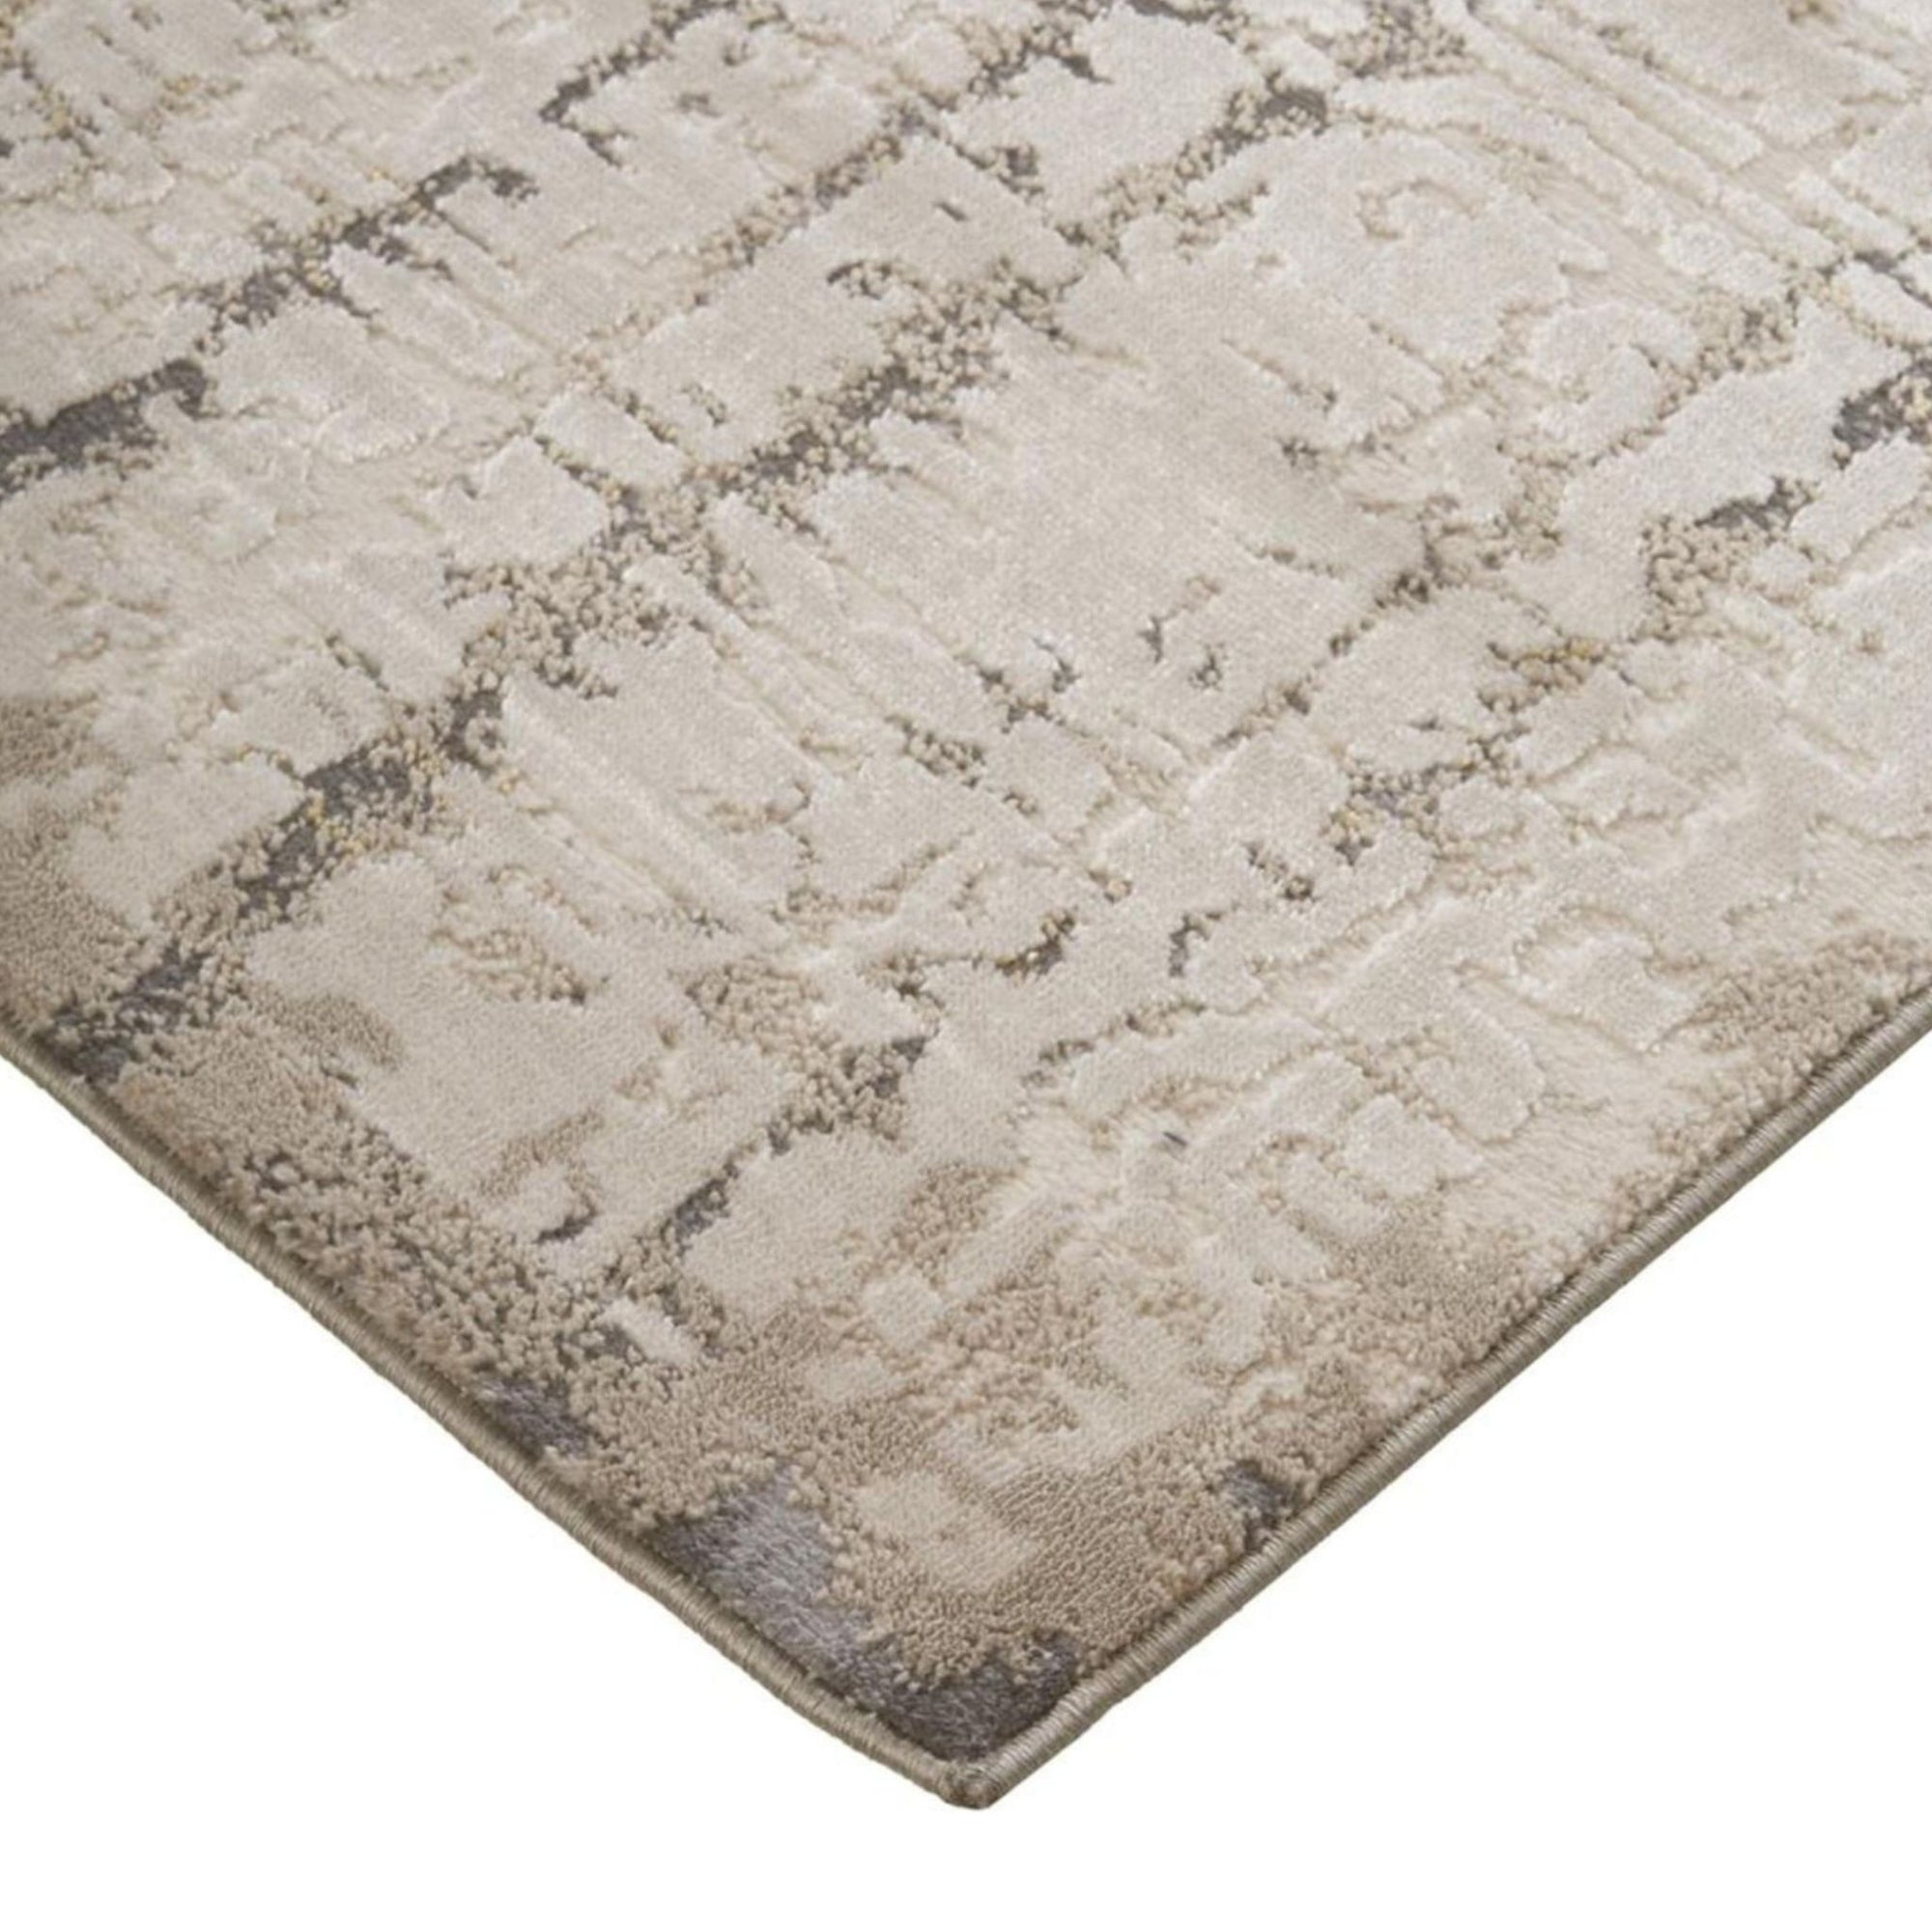 Waldor Distressed Abstract Rug in Beige